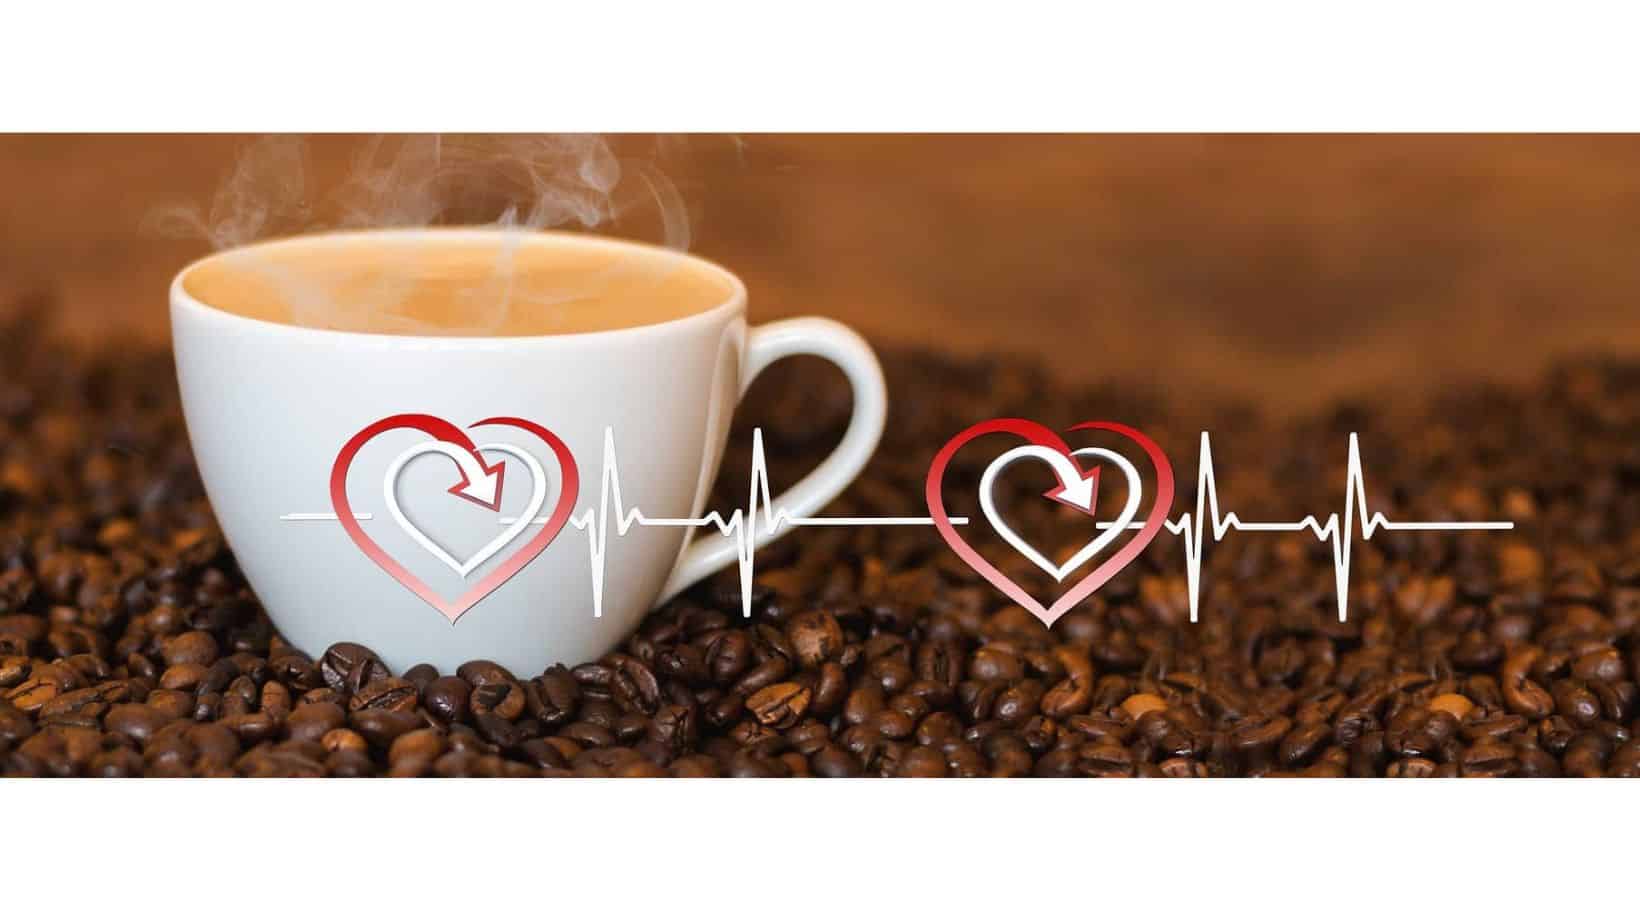 The Heart Health Benefits of Coffee